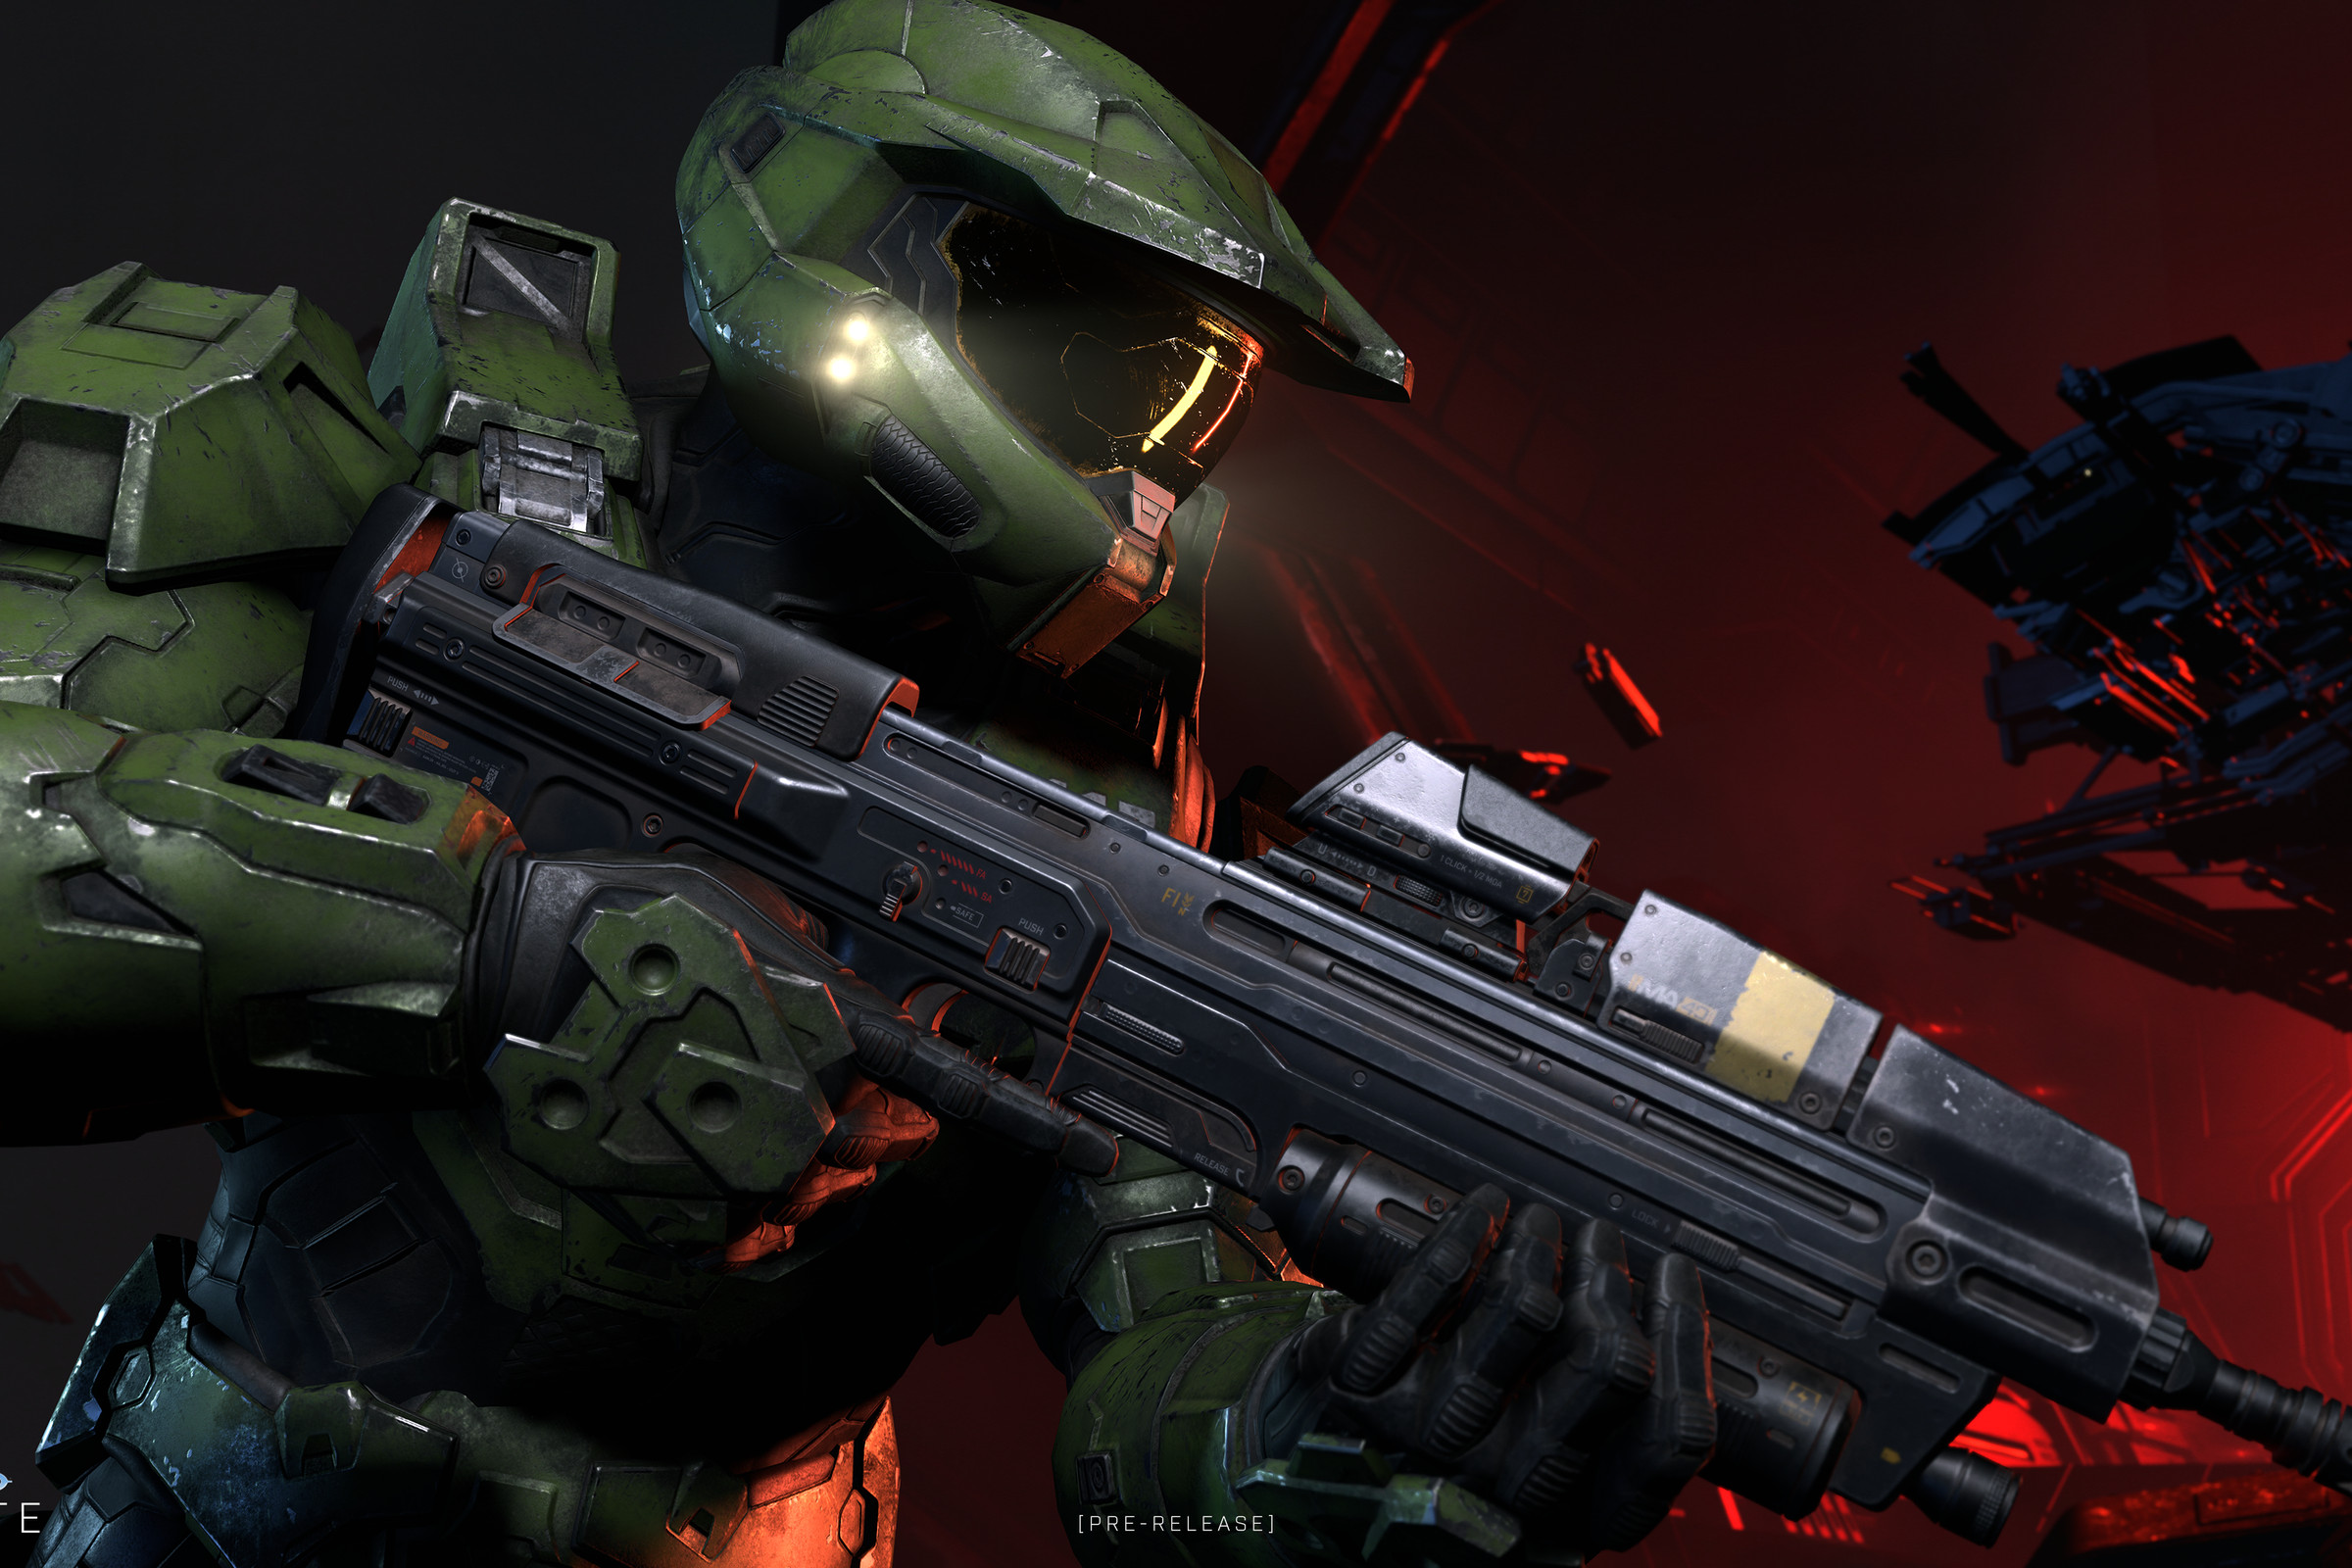 An image showing Master Chief